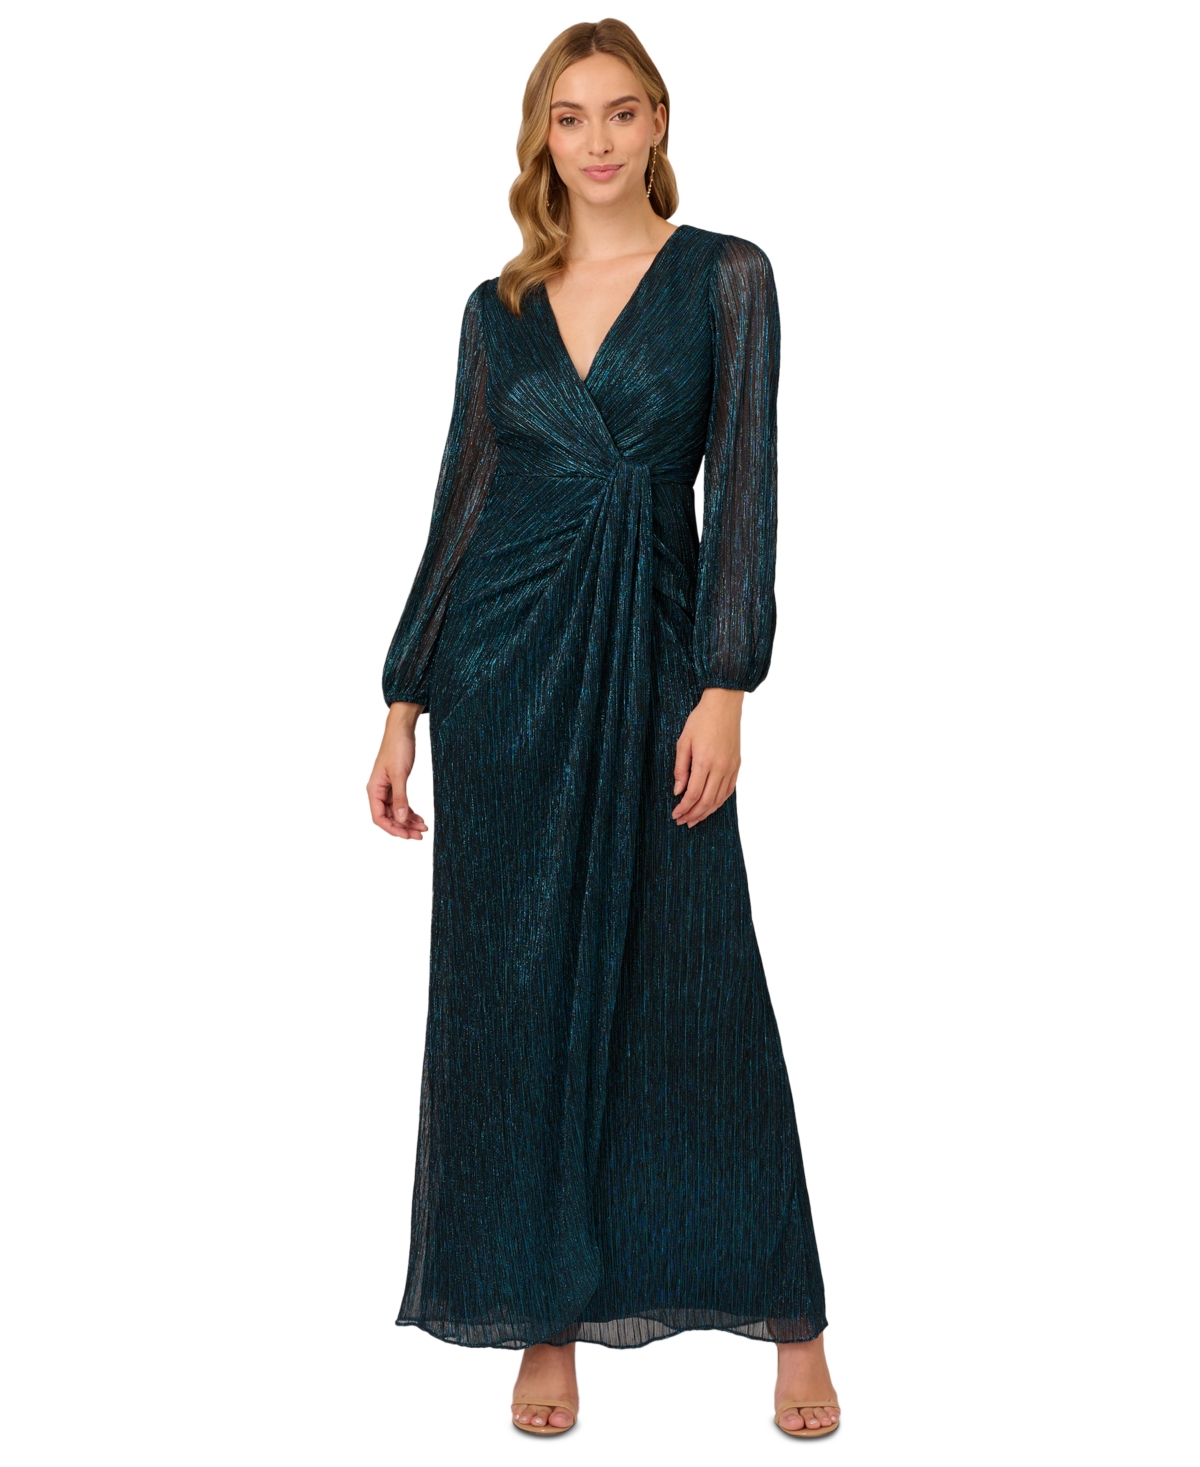 Adrianna Papell Women's Metallic Crinkled Draped Gown In Teal Sapphire